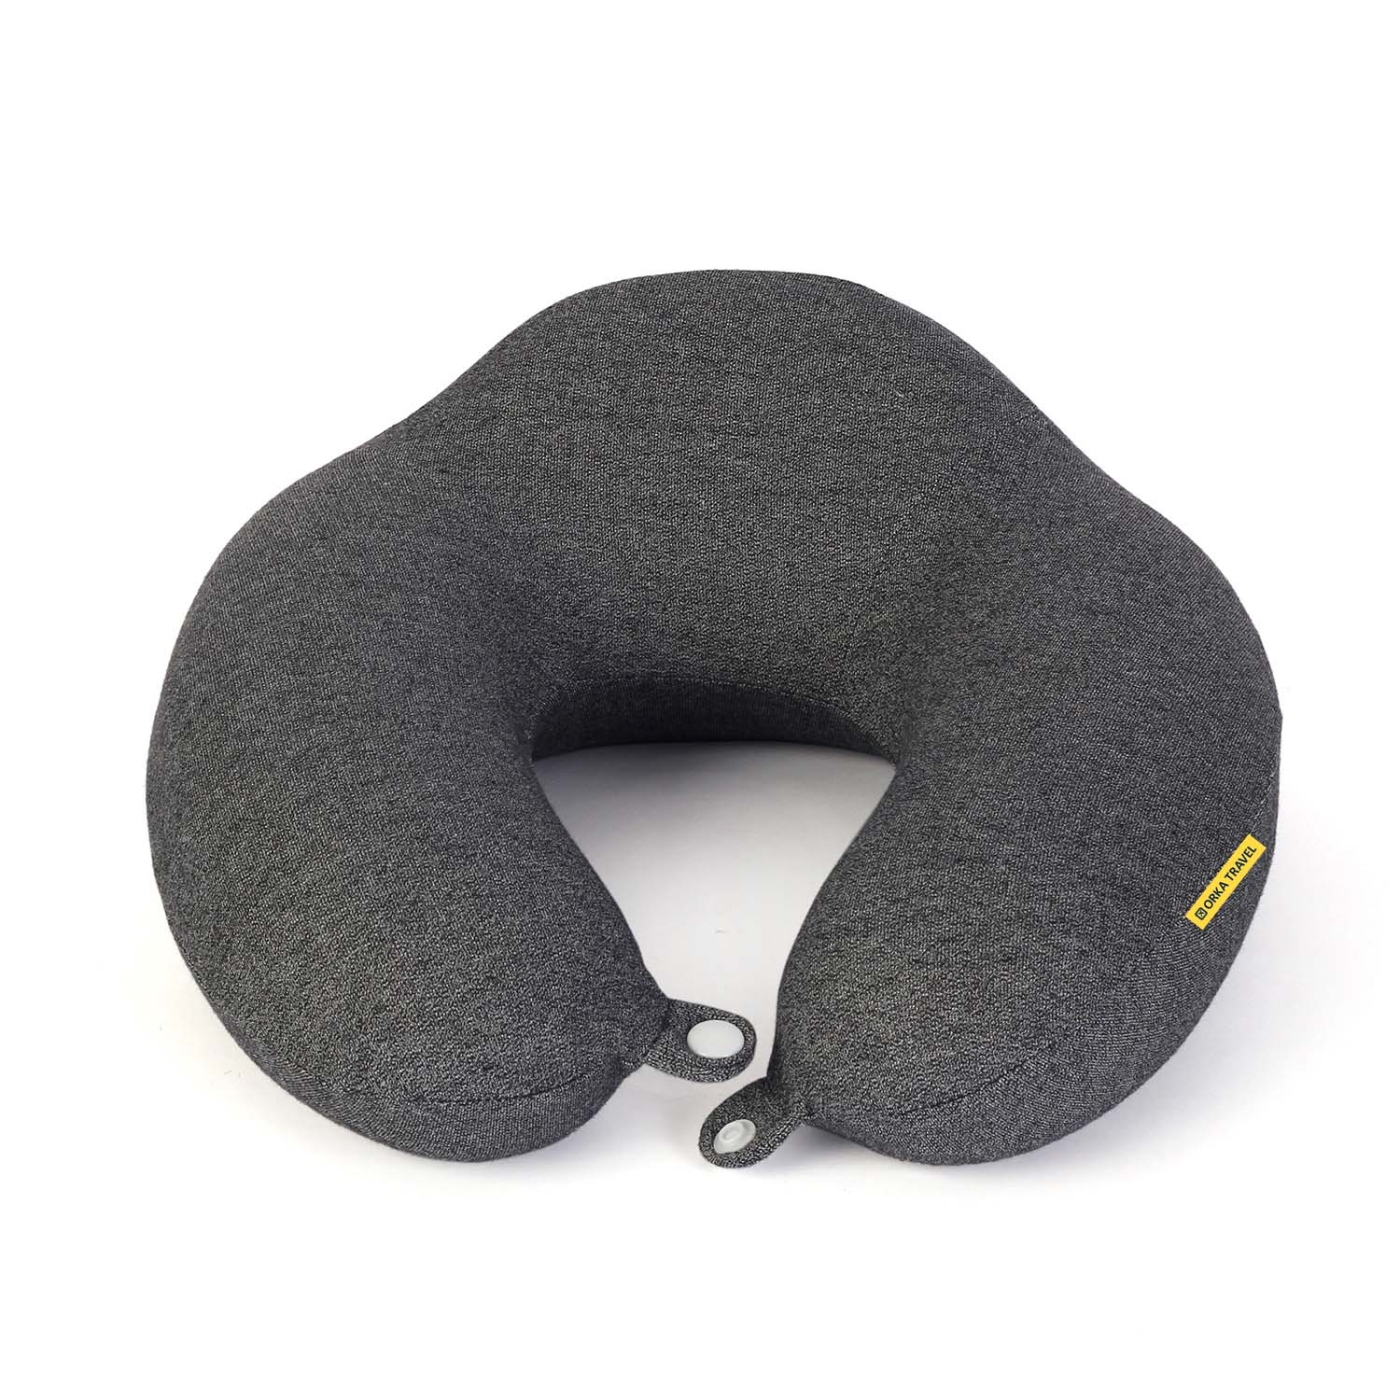 ORKA TRAVEL Solid Special Thermo Sensitive Memory Foam U Shaped Travel Neck Pillow - Dark Grey